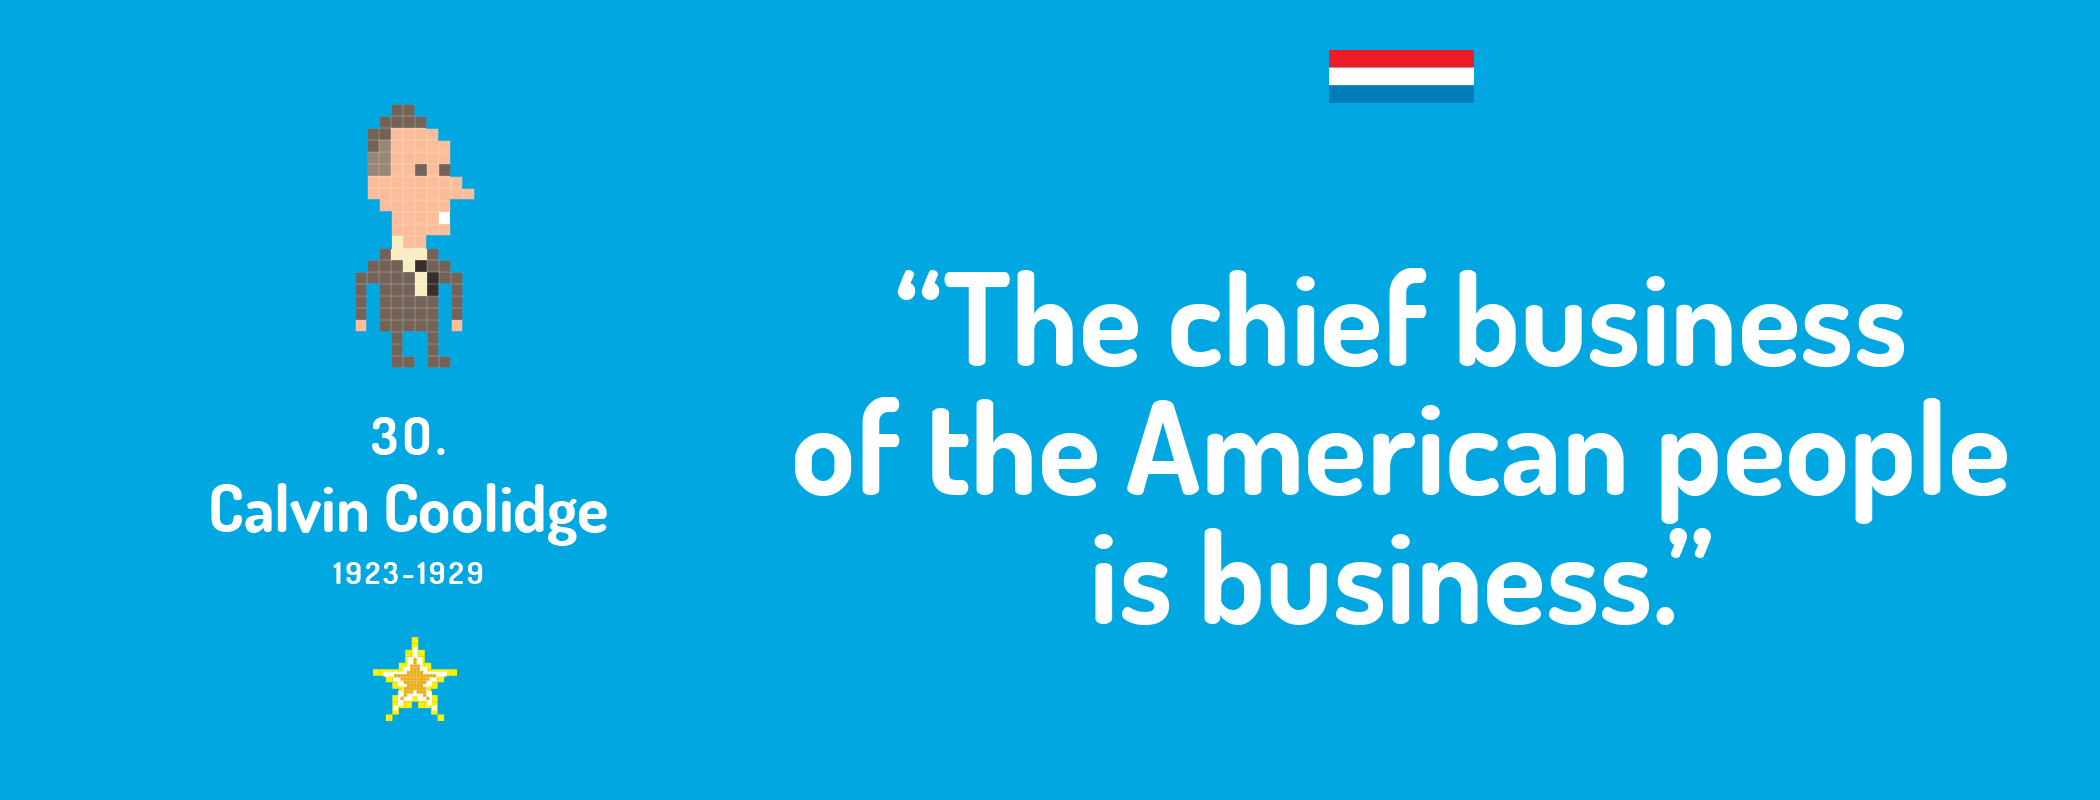 The chief business of the American people is business.